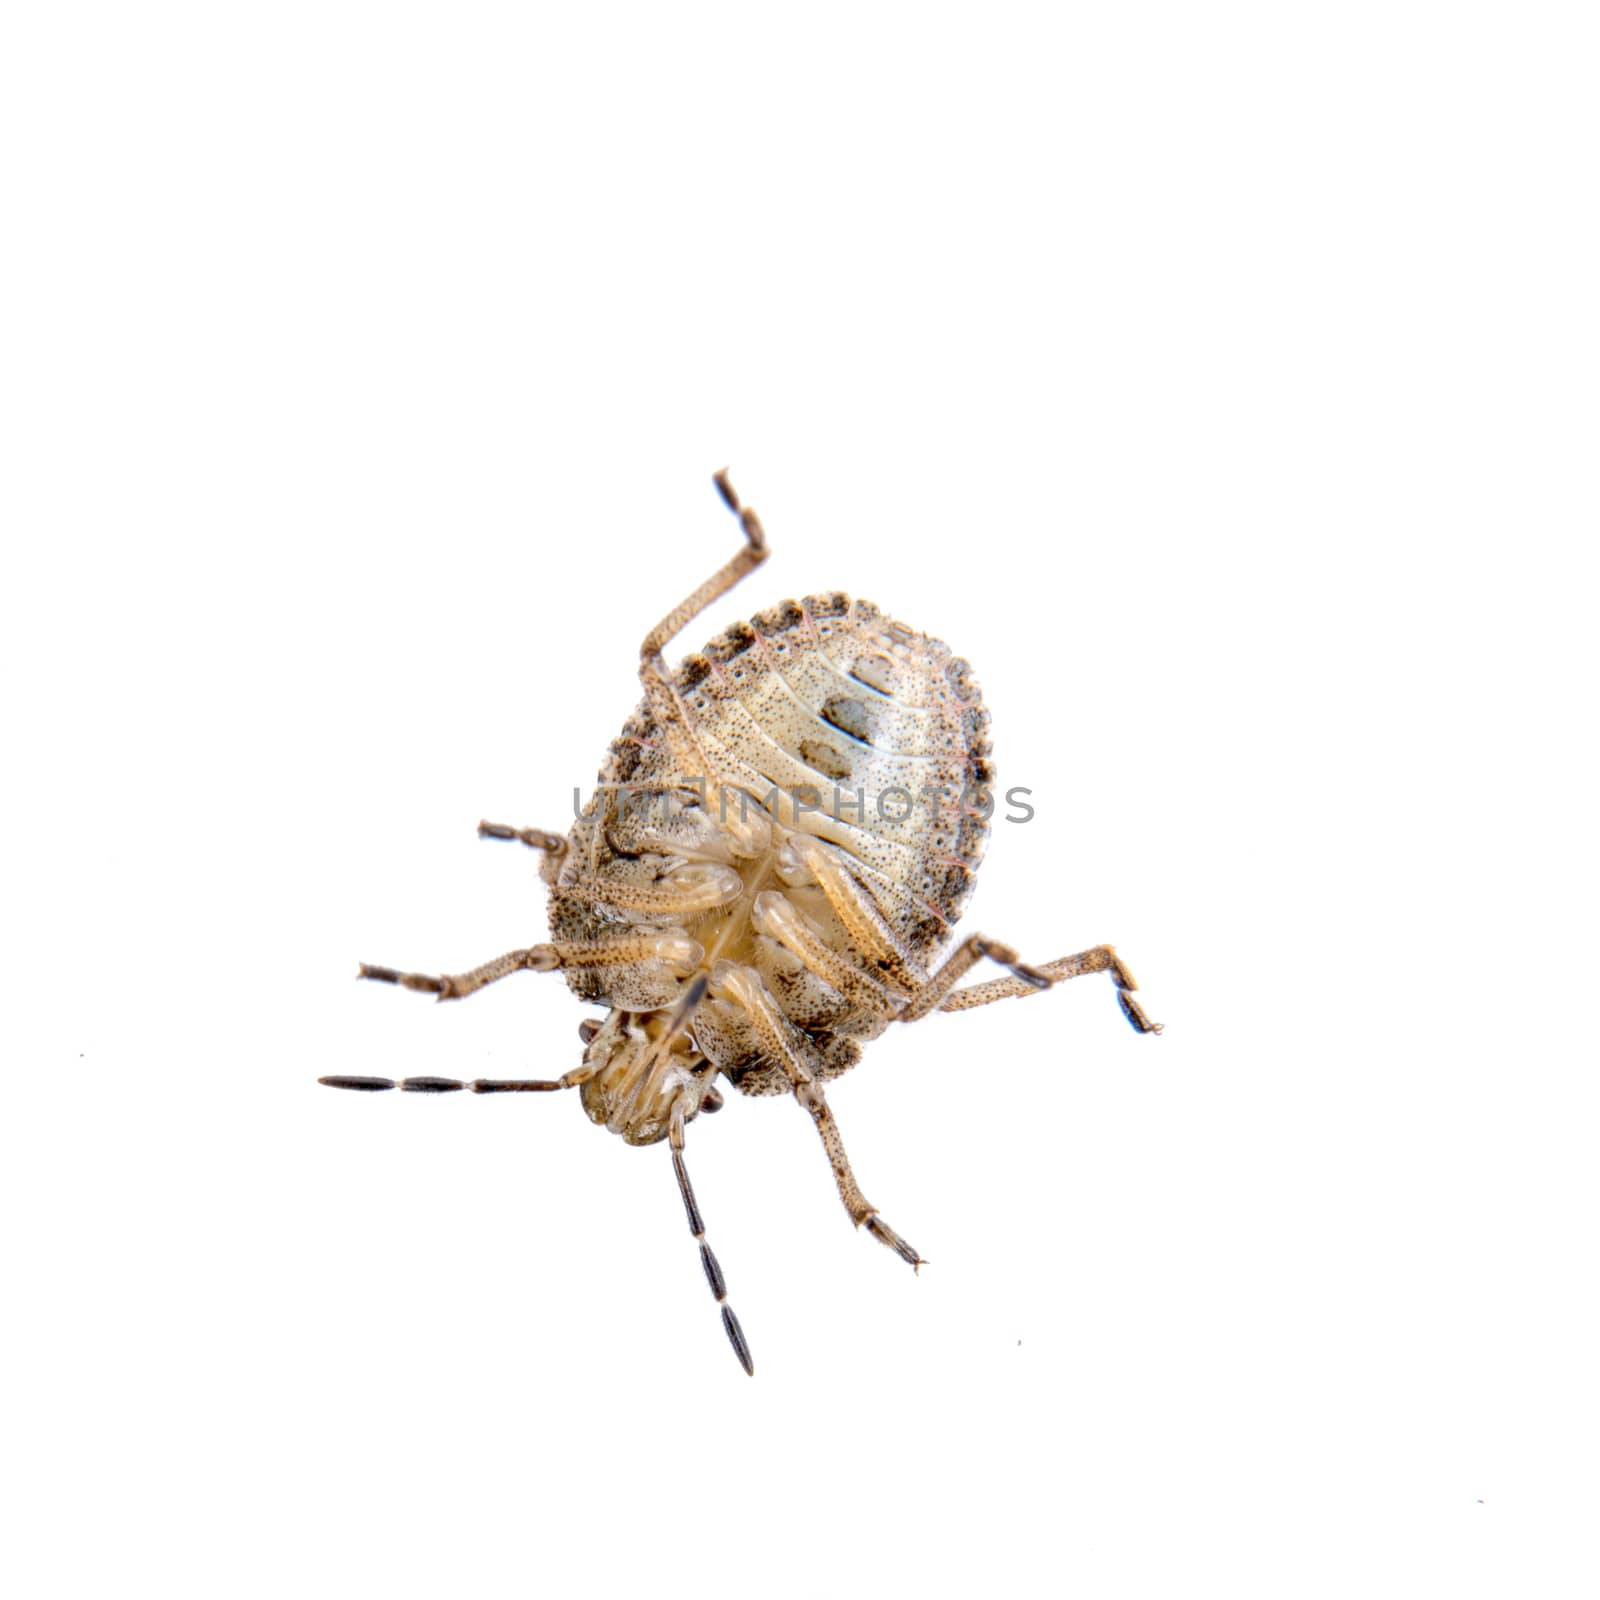 Brown shield bug isolated on a white background